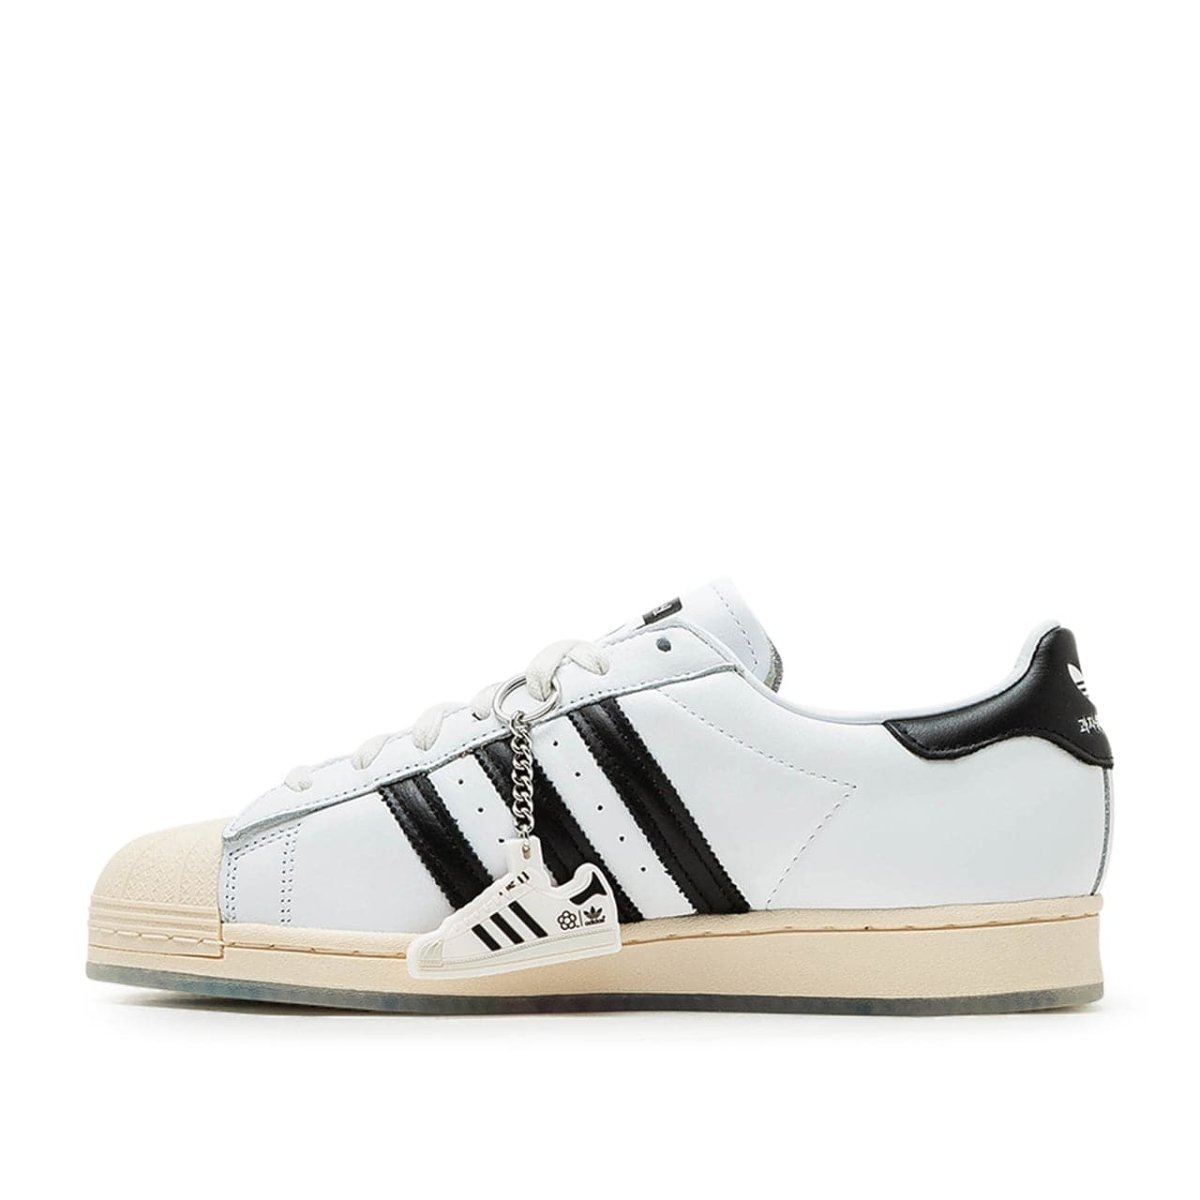 adidas 'adilicous' Superstar Taegeukdang (Weiss)  - Allike Store